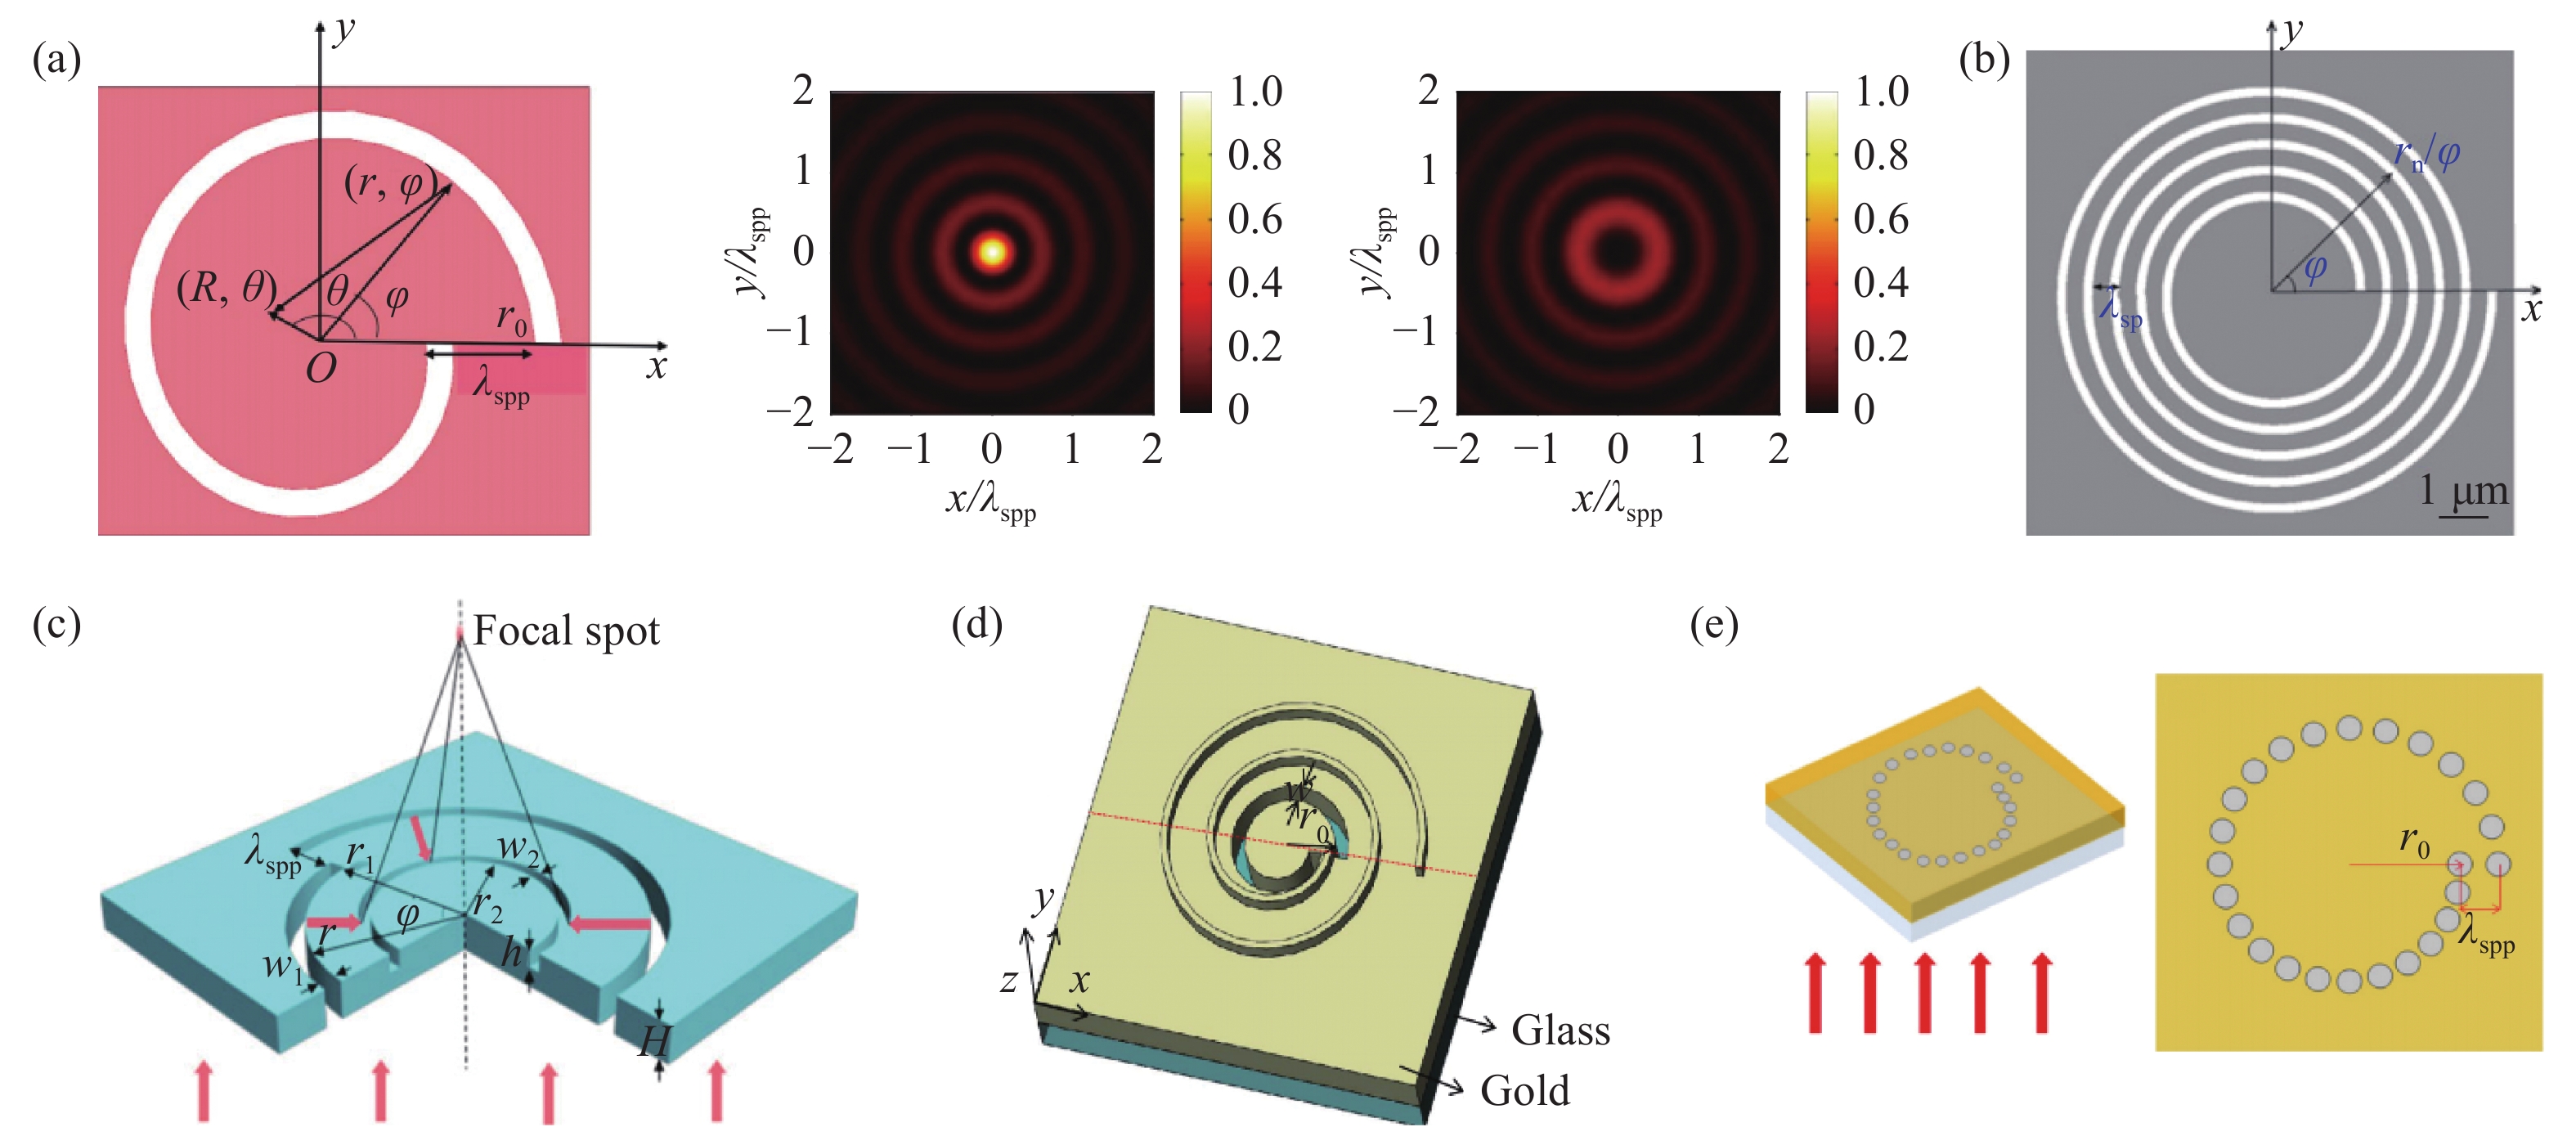 Devices for detecting circular polarization based on Archimedes spiral plasmonic structures[85-90]